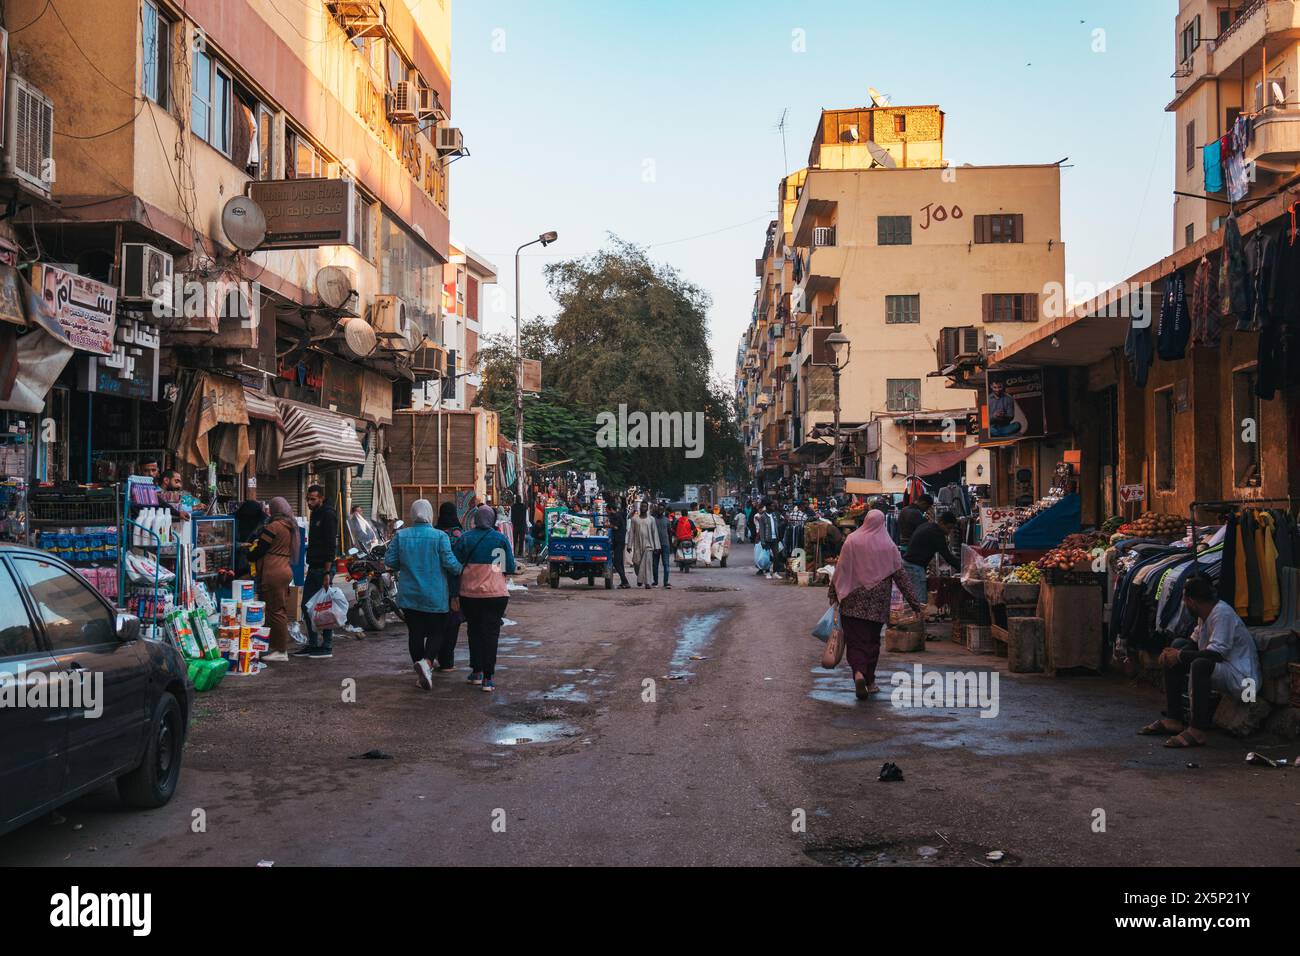 a bustling street with various stalls selling food and clothing in the city of Aswan, Egypt Stock Photo